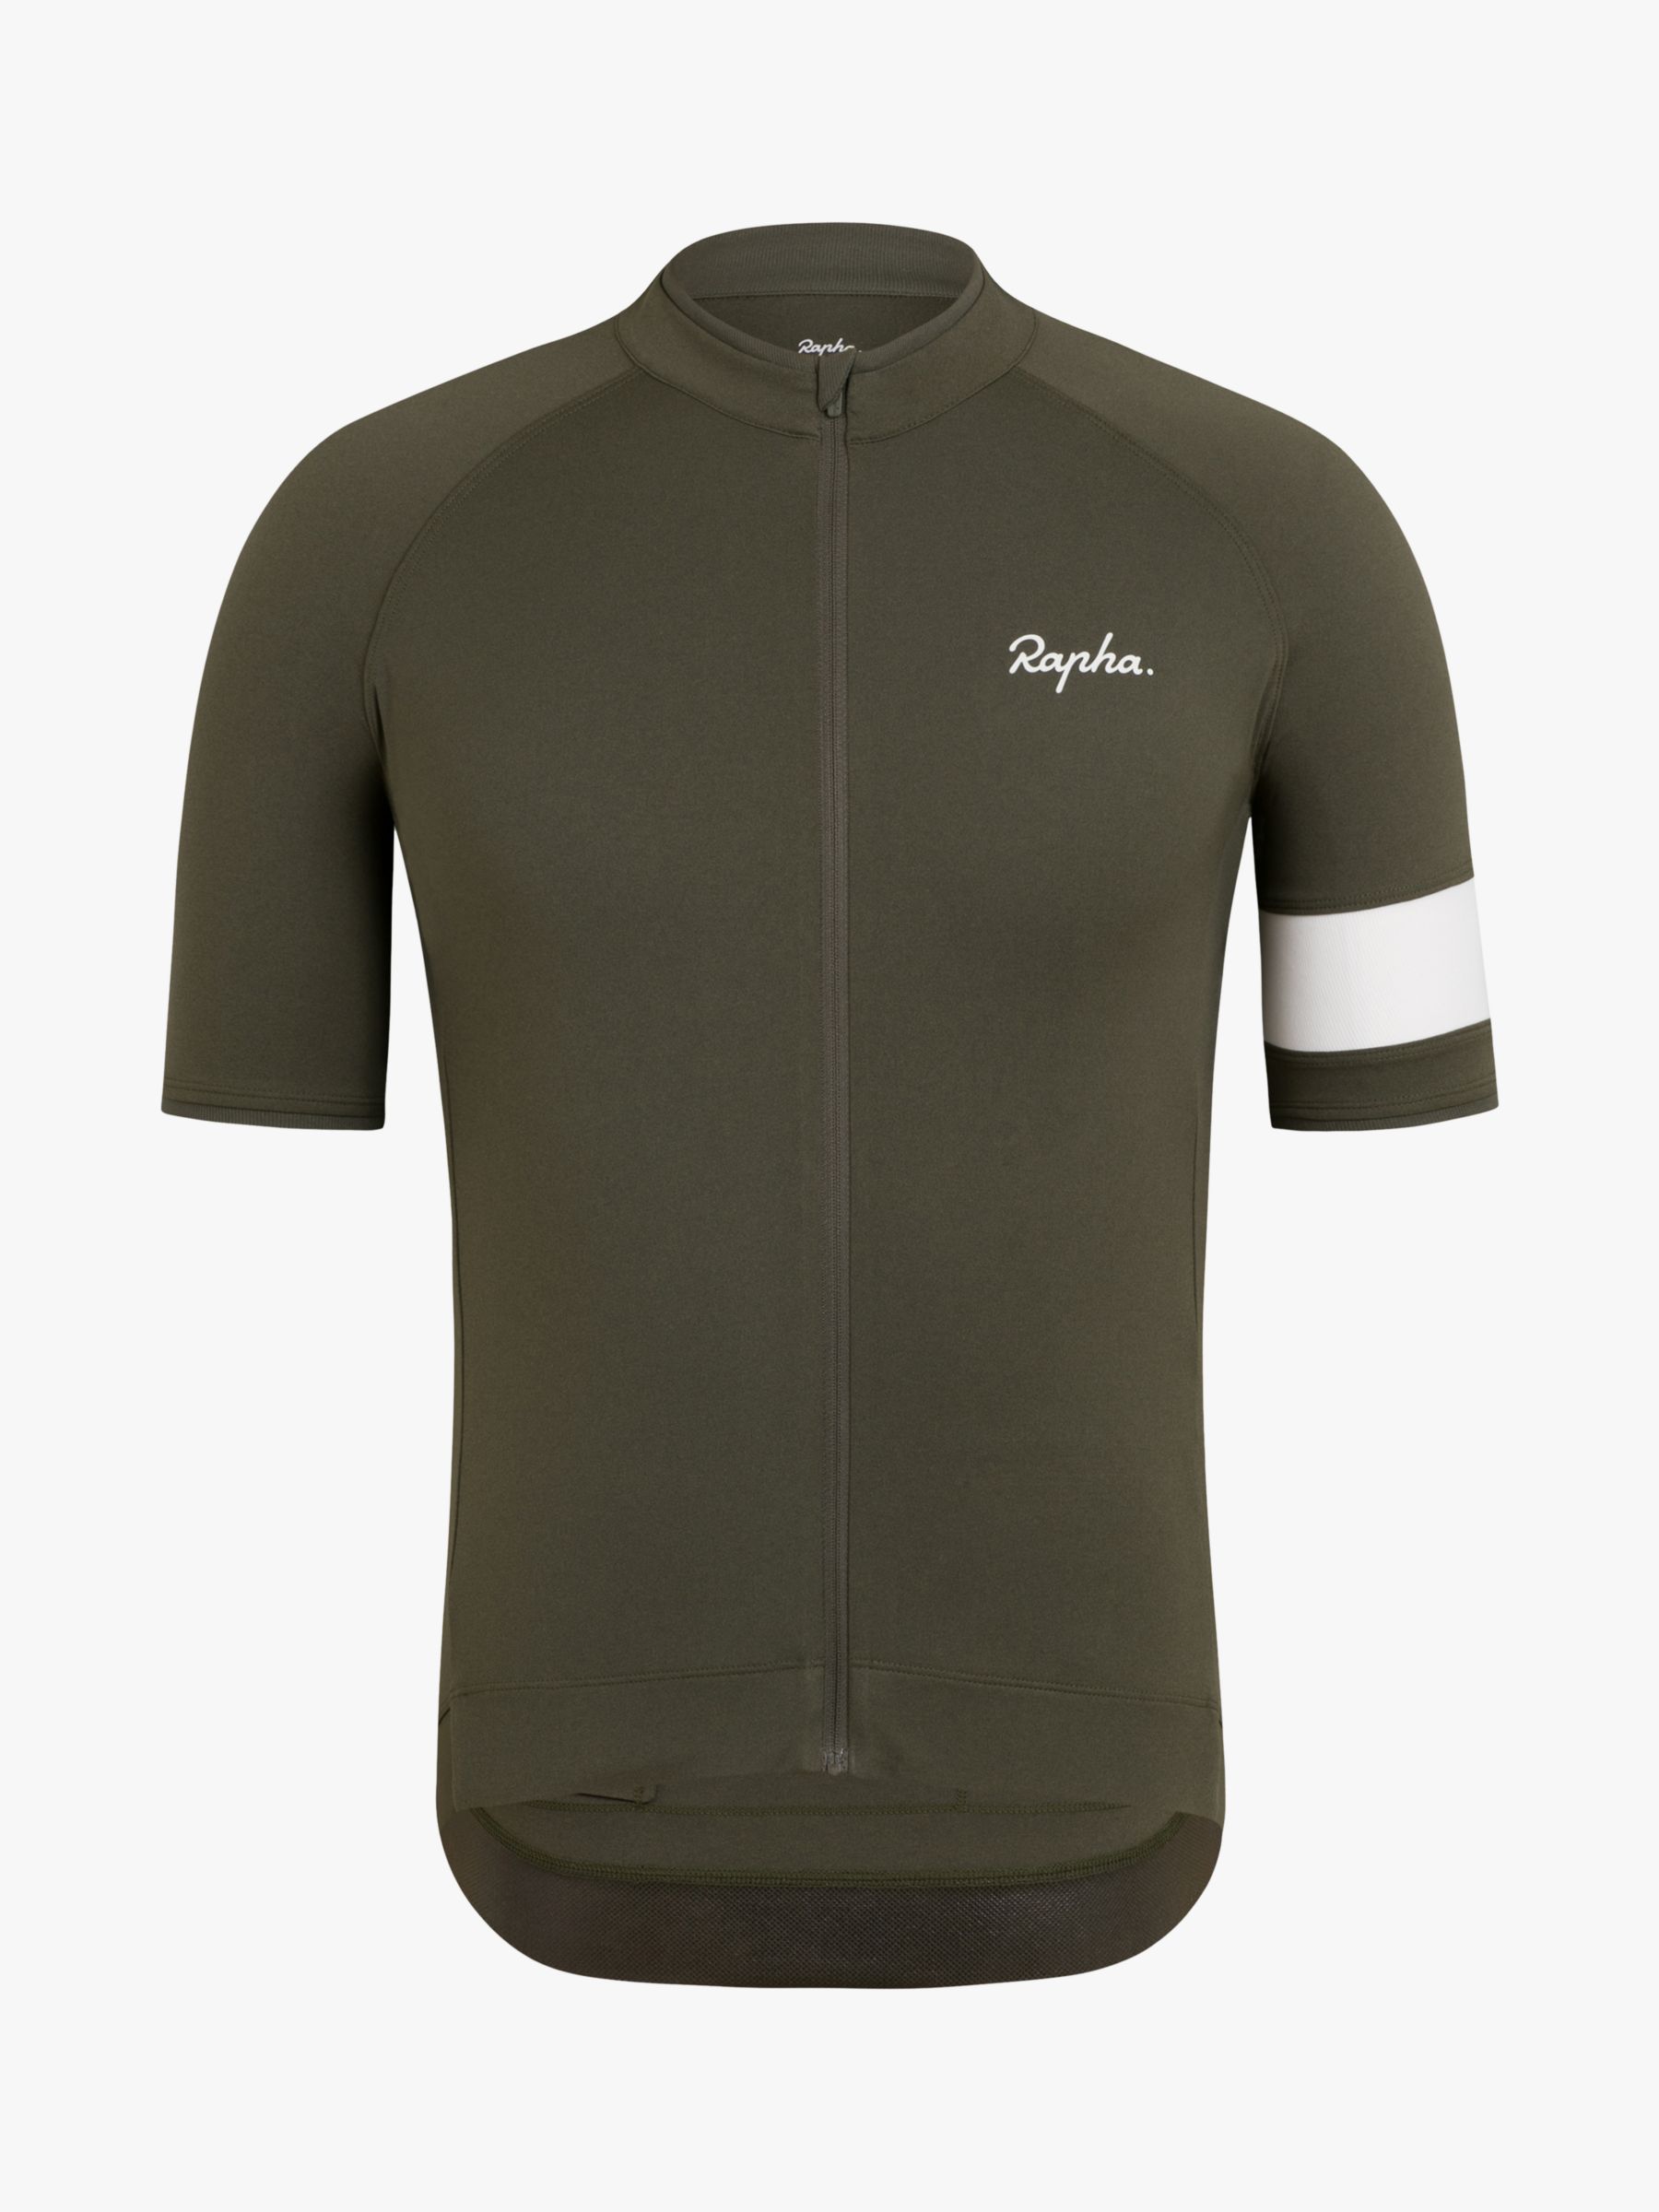 Rapha Core Jersey Short Sleeve Cycling Top, Forest Night, S